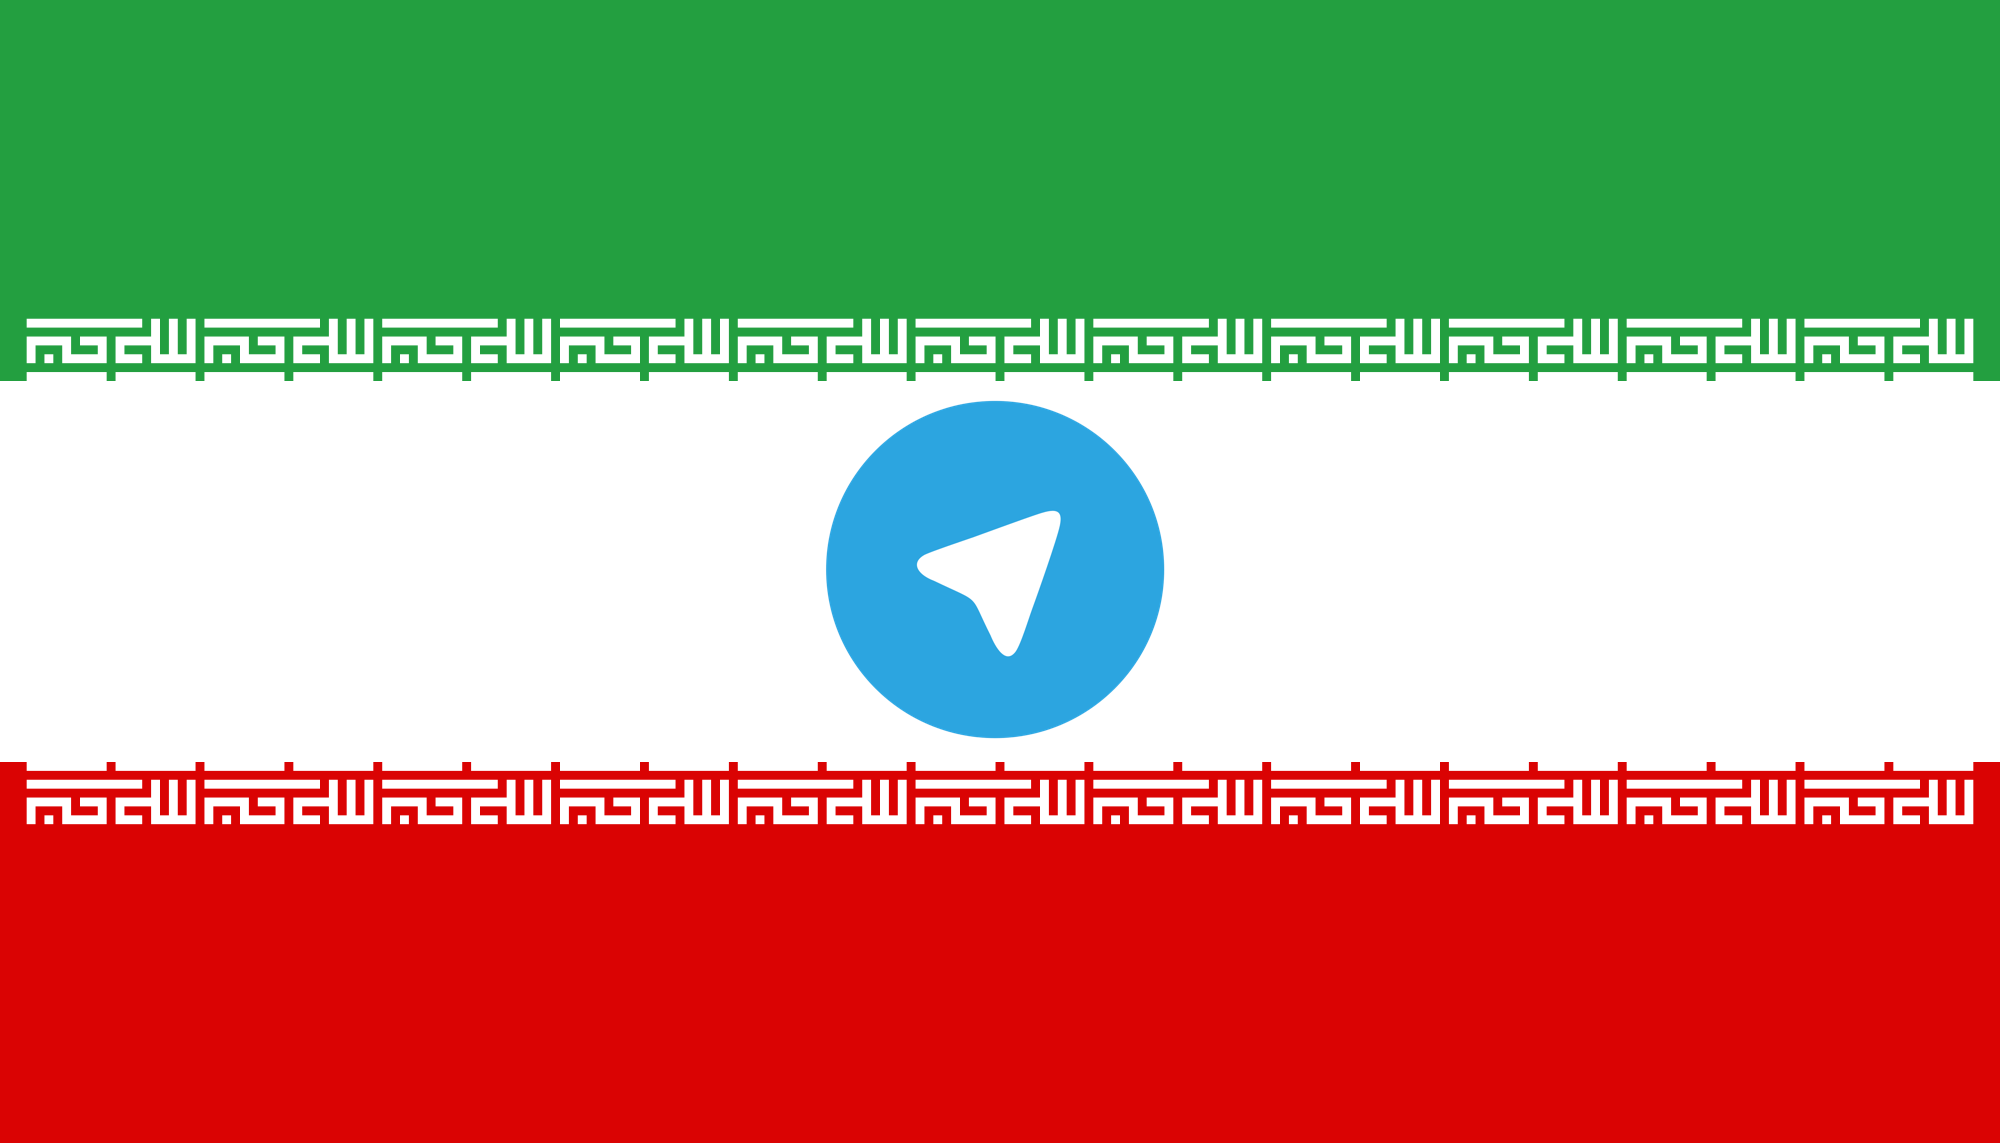 Telegram is reportedly complying with the Iranian government. Image remixed by author.